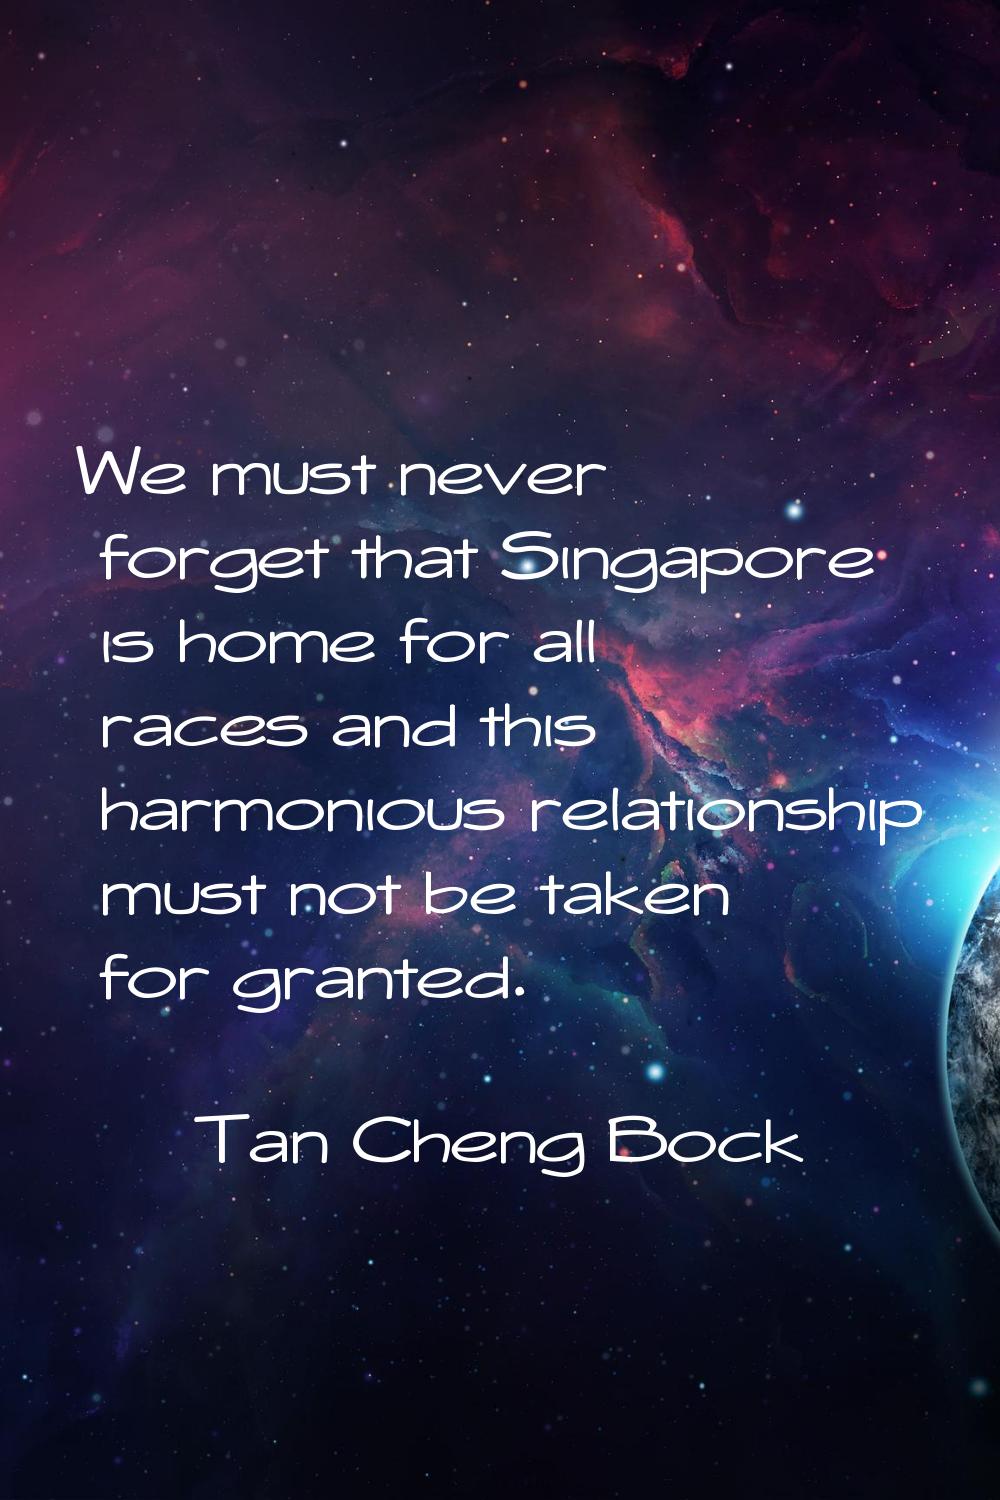 We must never forget that Singapore is home for all races and this harmonious relationship must not